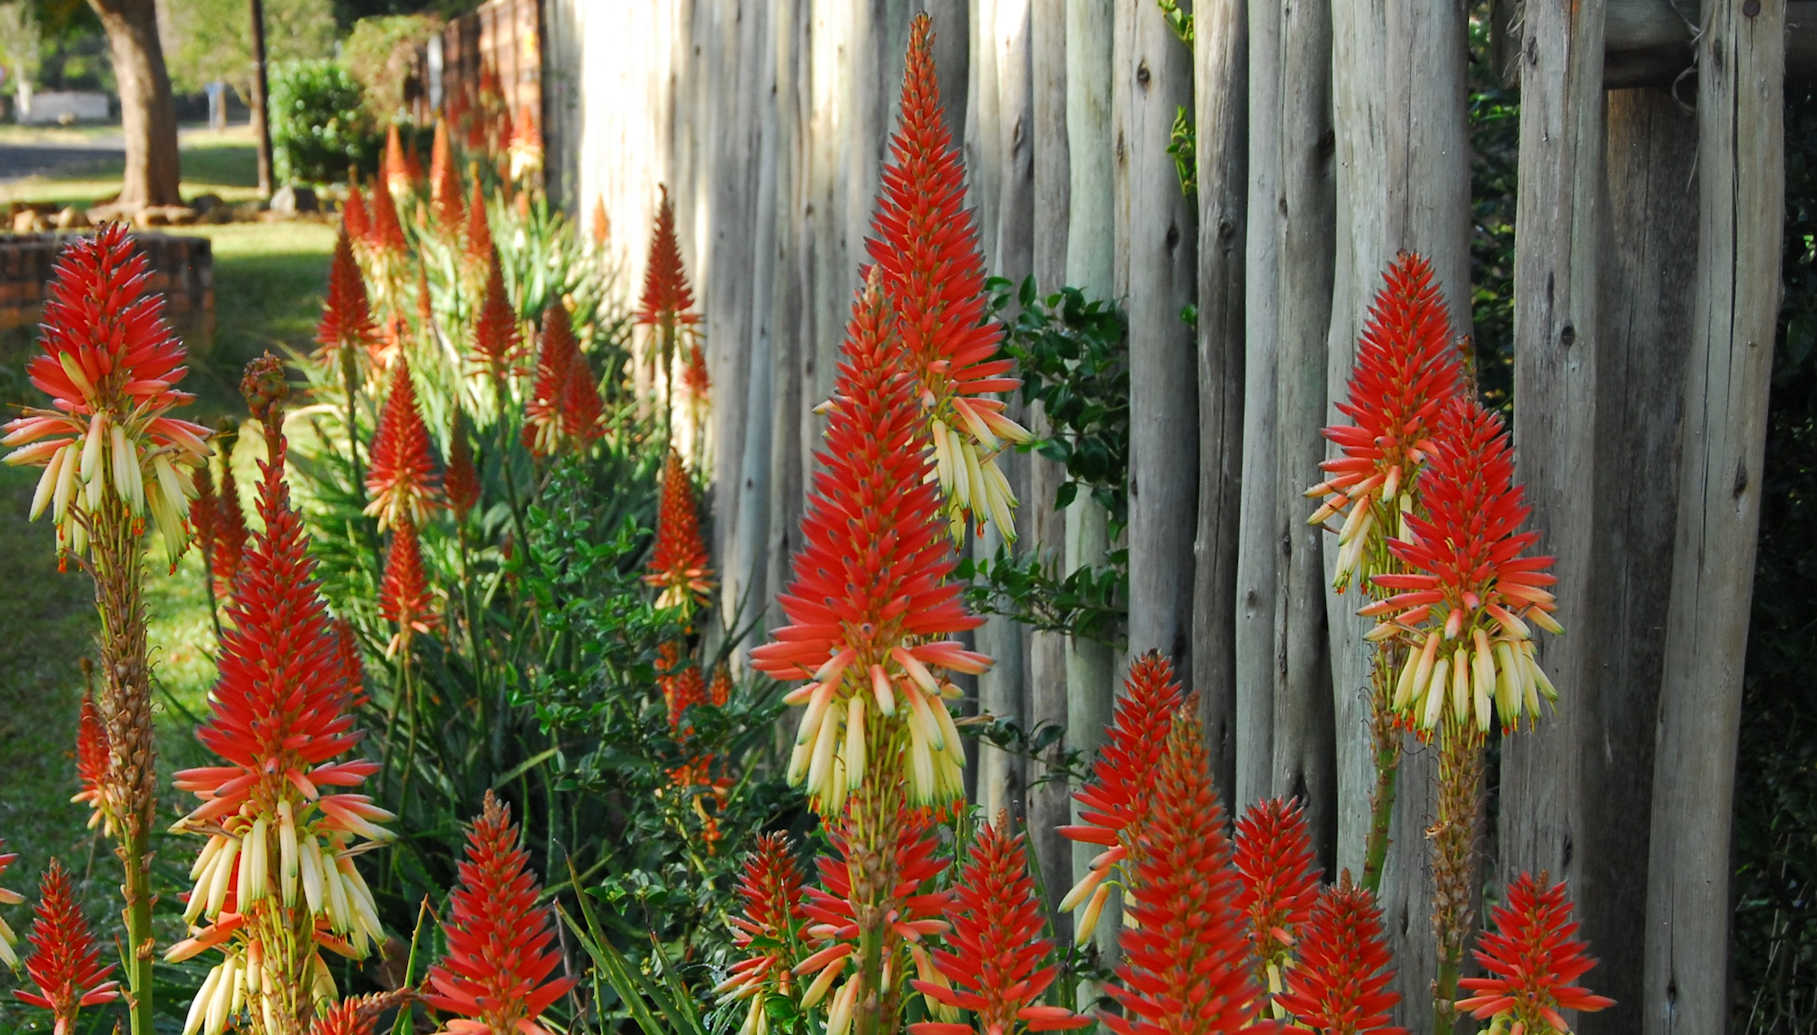 Aloes in bloom along a wooden fence